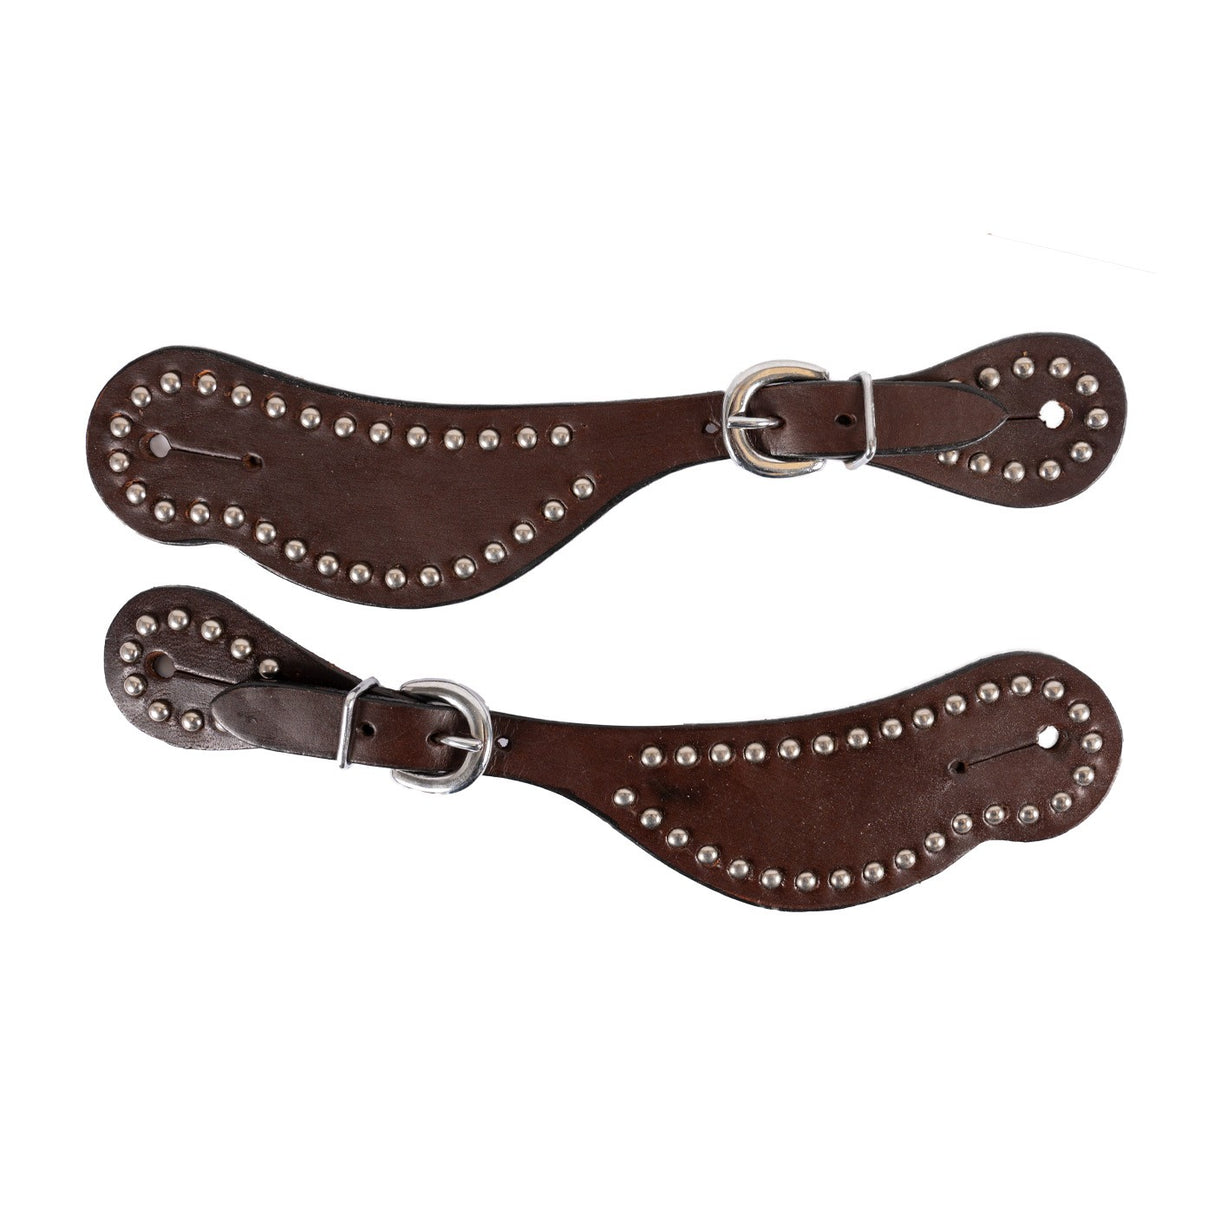 Royal King Shaped Leather Spur Straps